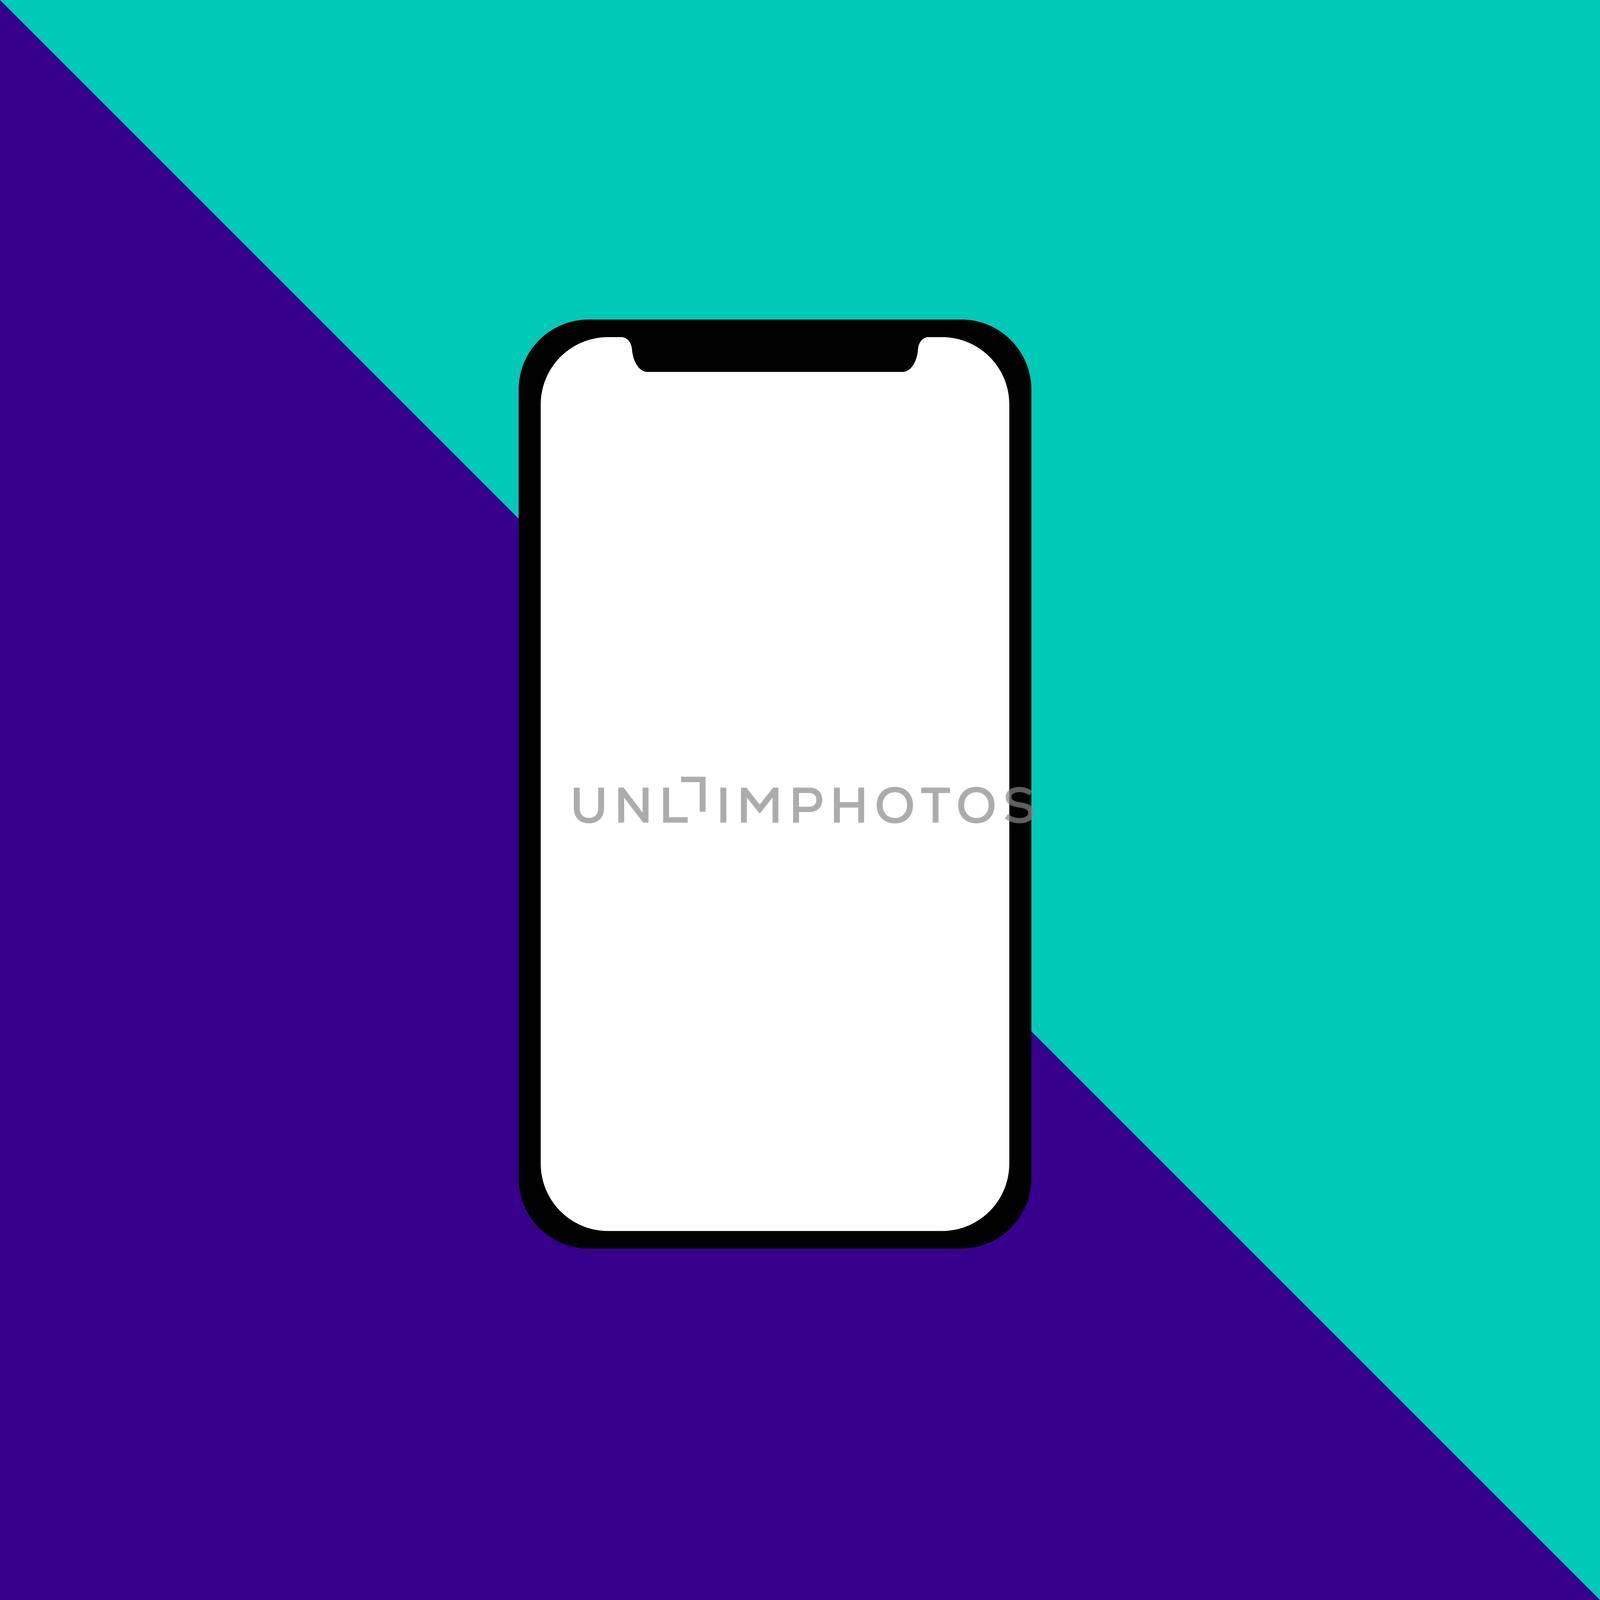 Smart phone square icon. Flat design style. Mobile phone simple silhouette. Modern, minimalist, round icon in stylish colors. Web site page and mobile app design vector element. Elegant by mrceviz